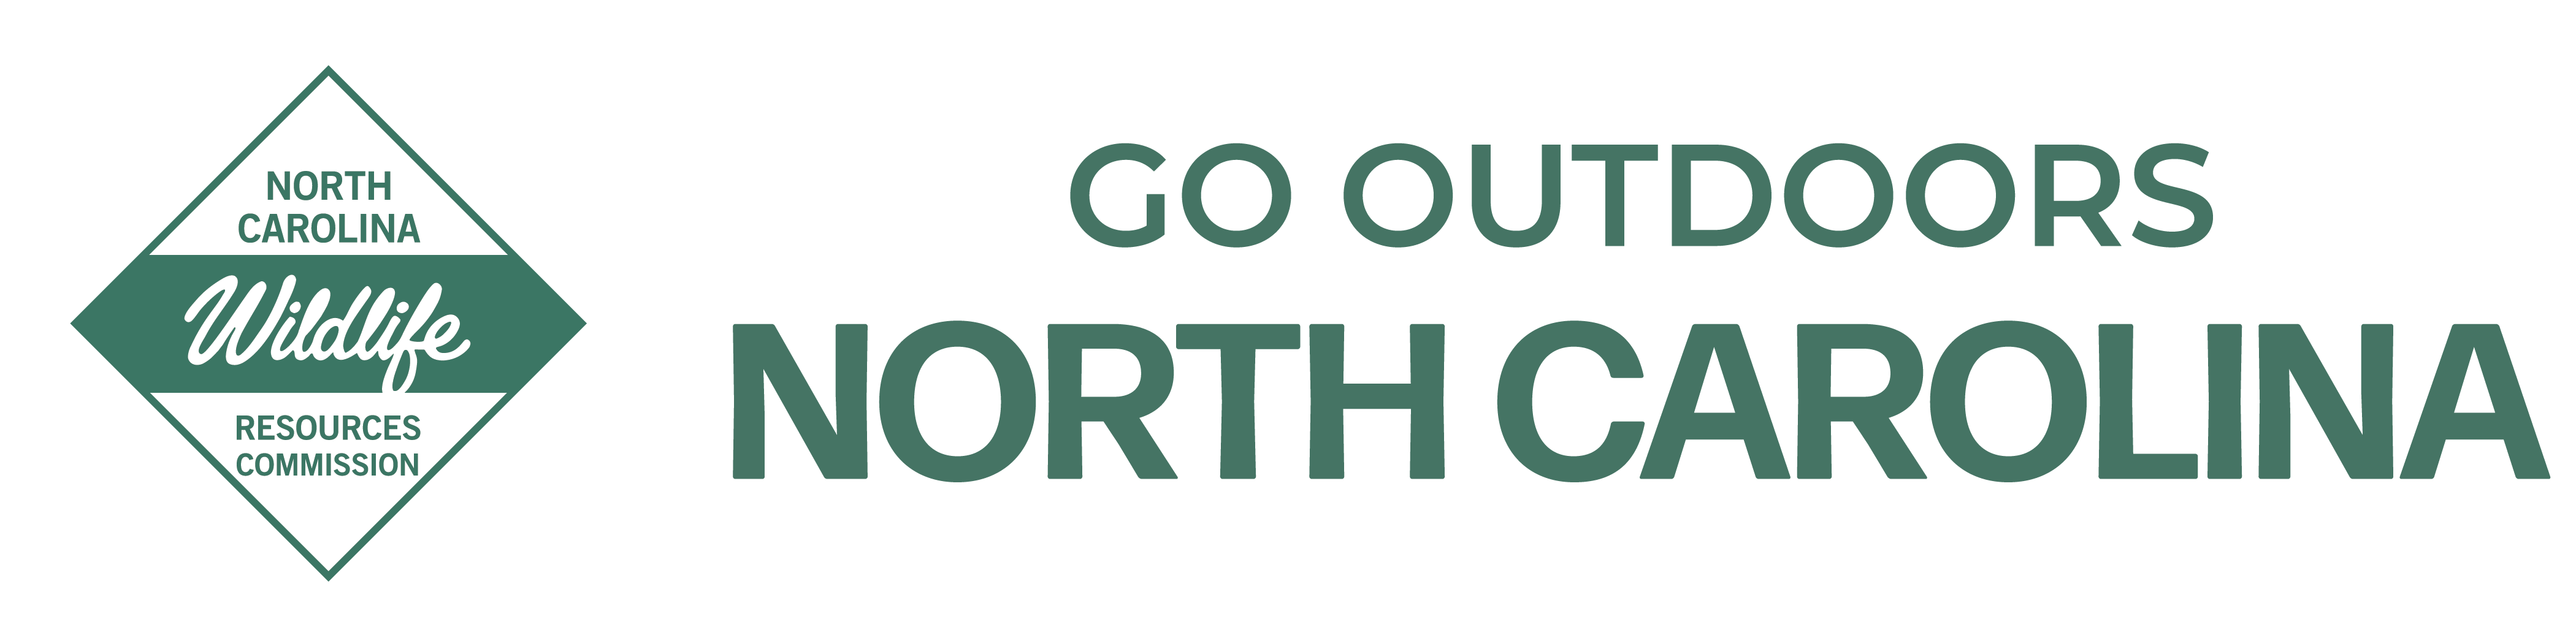 New license and vessel registration system, Go Outdoors North